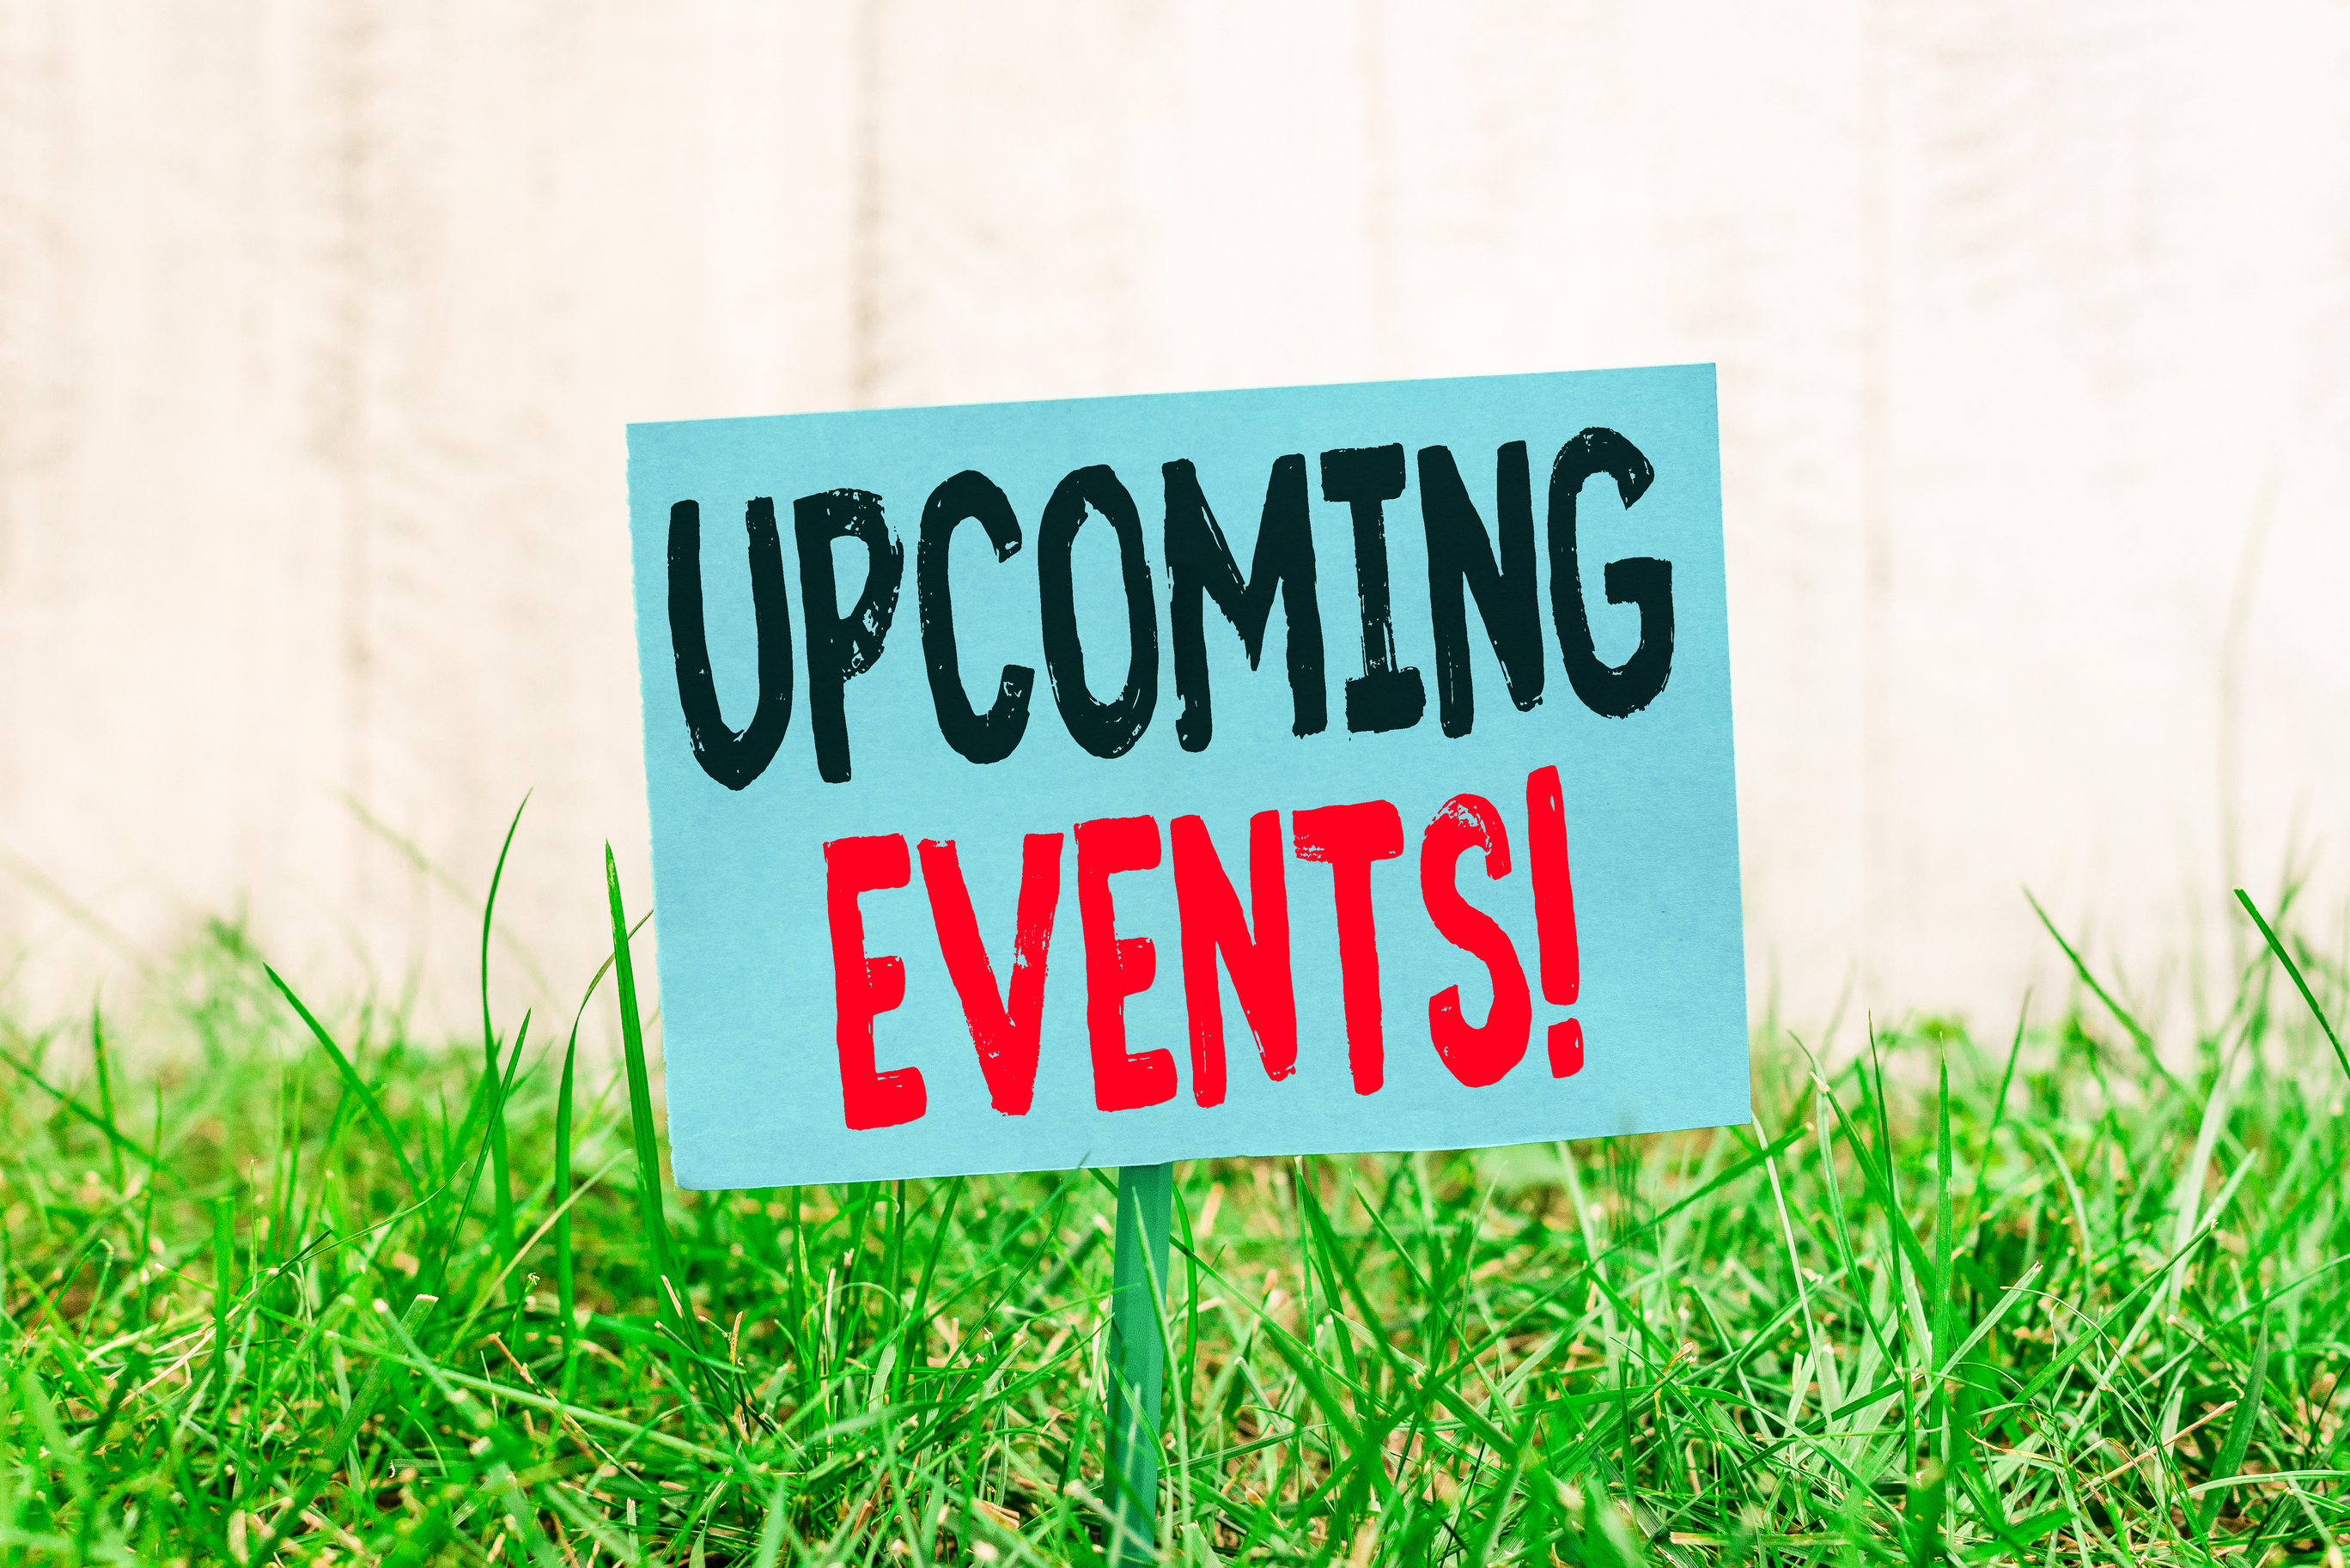  Events Near Me - tickets for upcoming Events in your area 